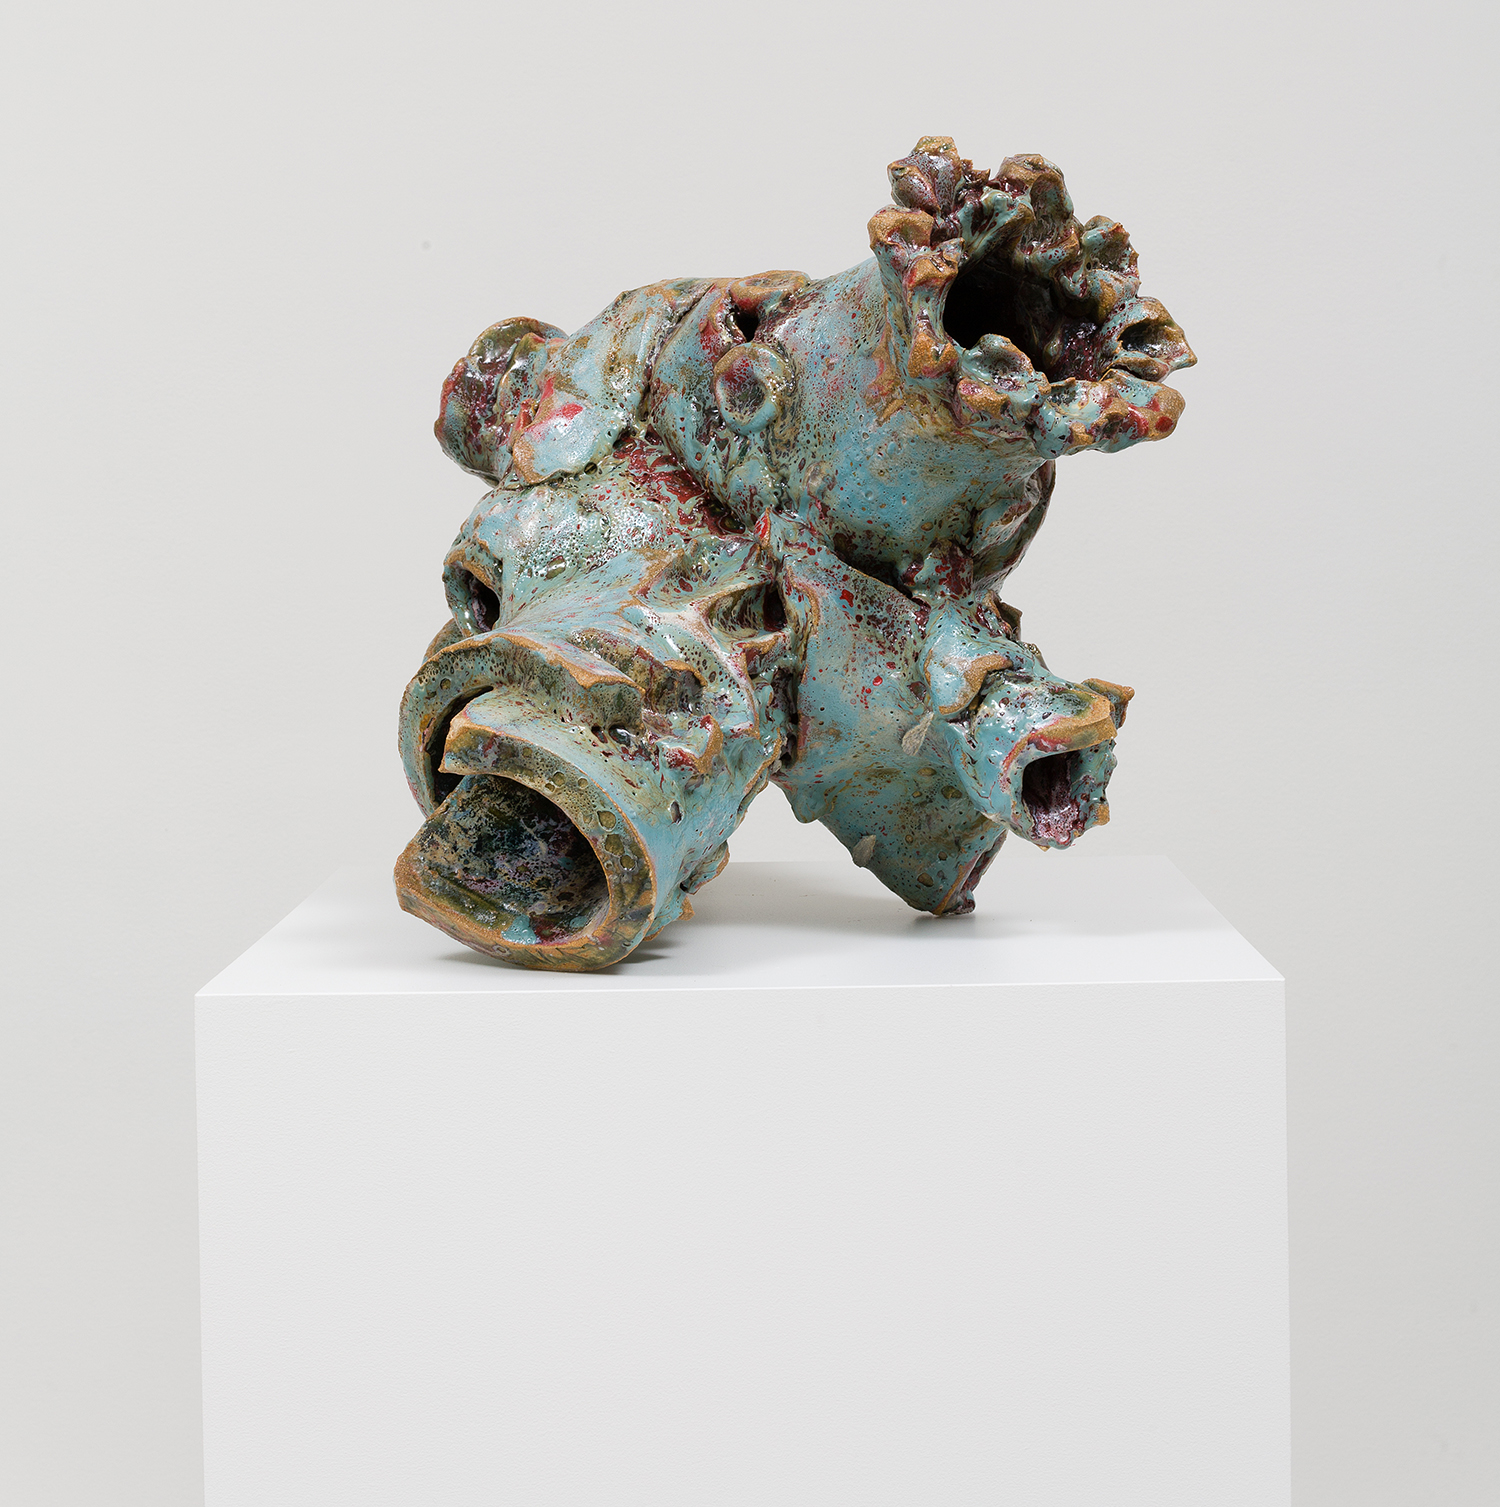    
  
 
  
     Christopher Miles  Untitled (Nugget #4)    2013 Glazed stoneware 14.5 x 20 x 19 Inches  Courtesy of the Artist 